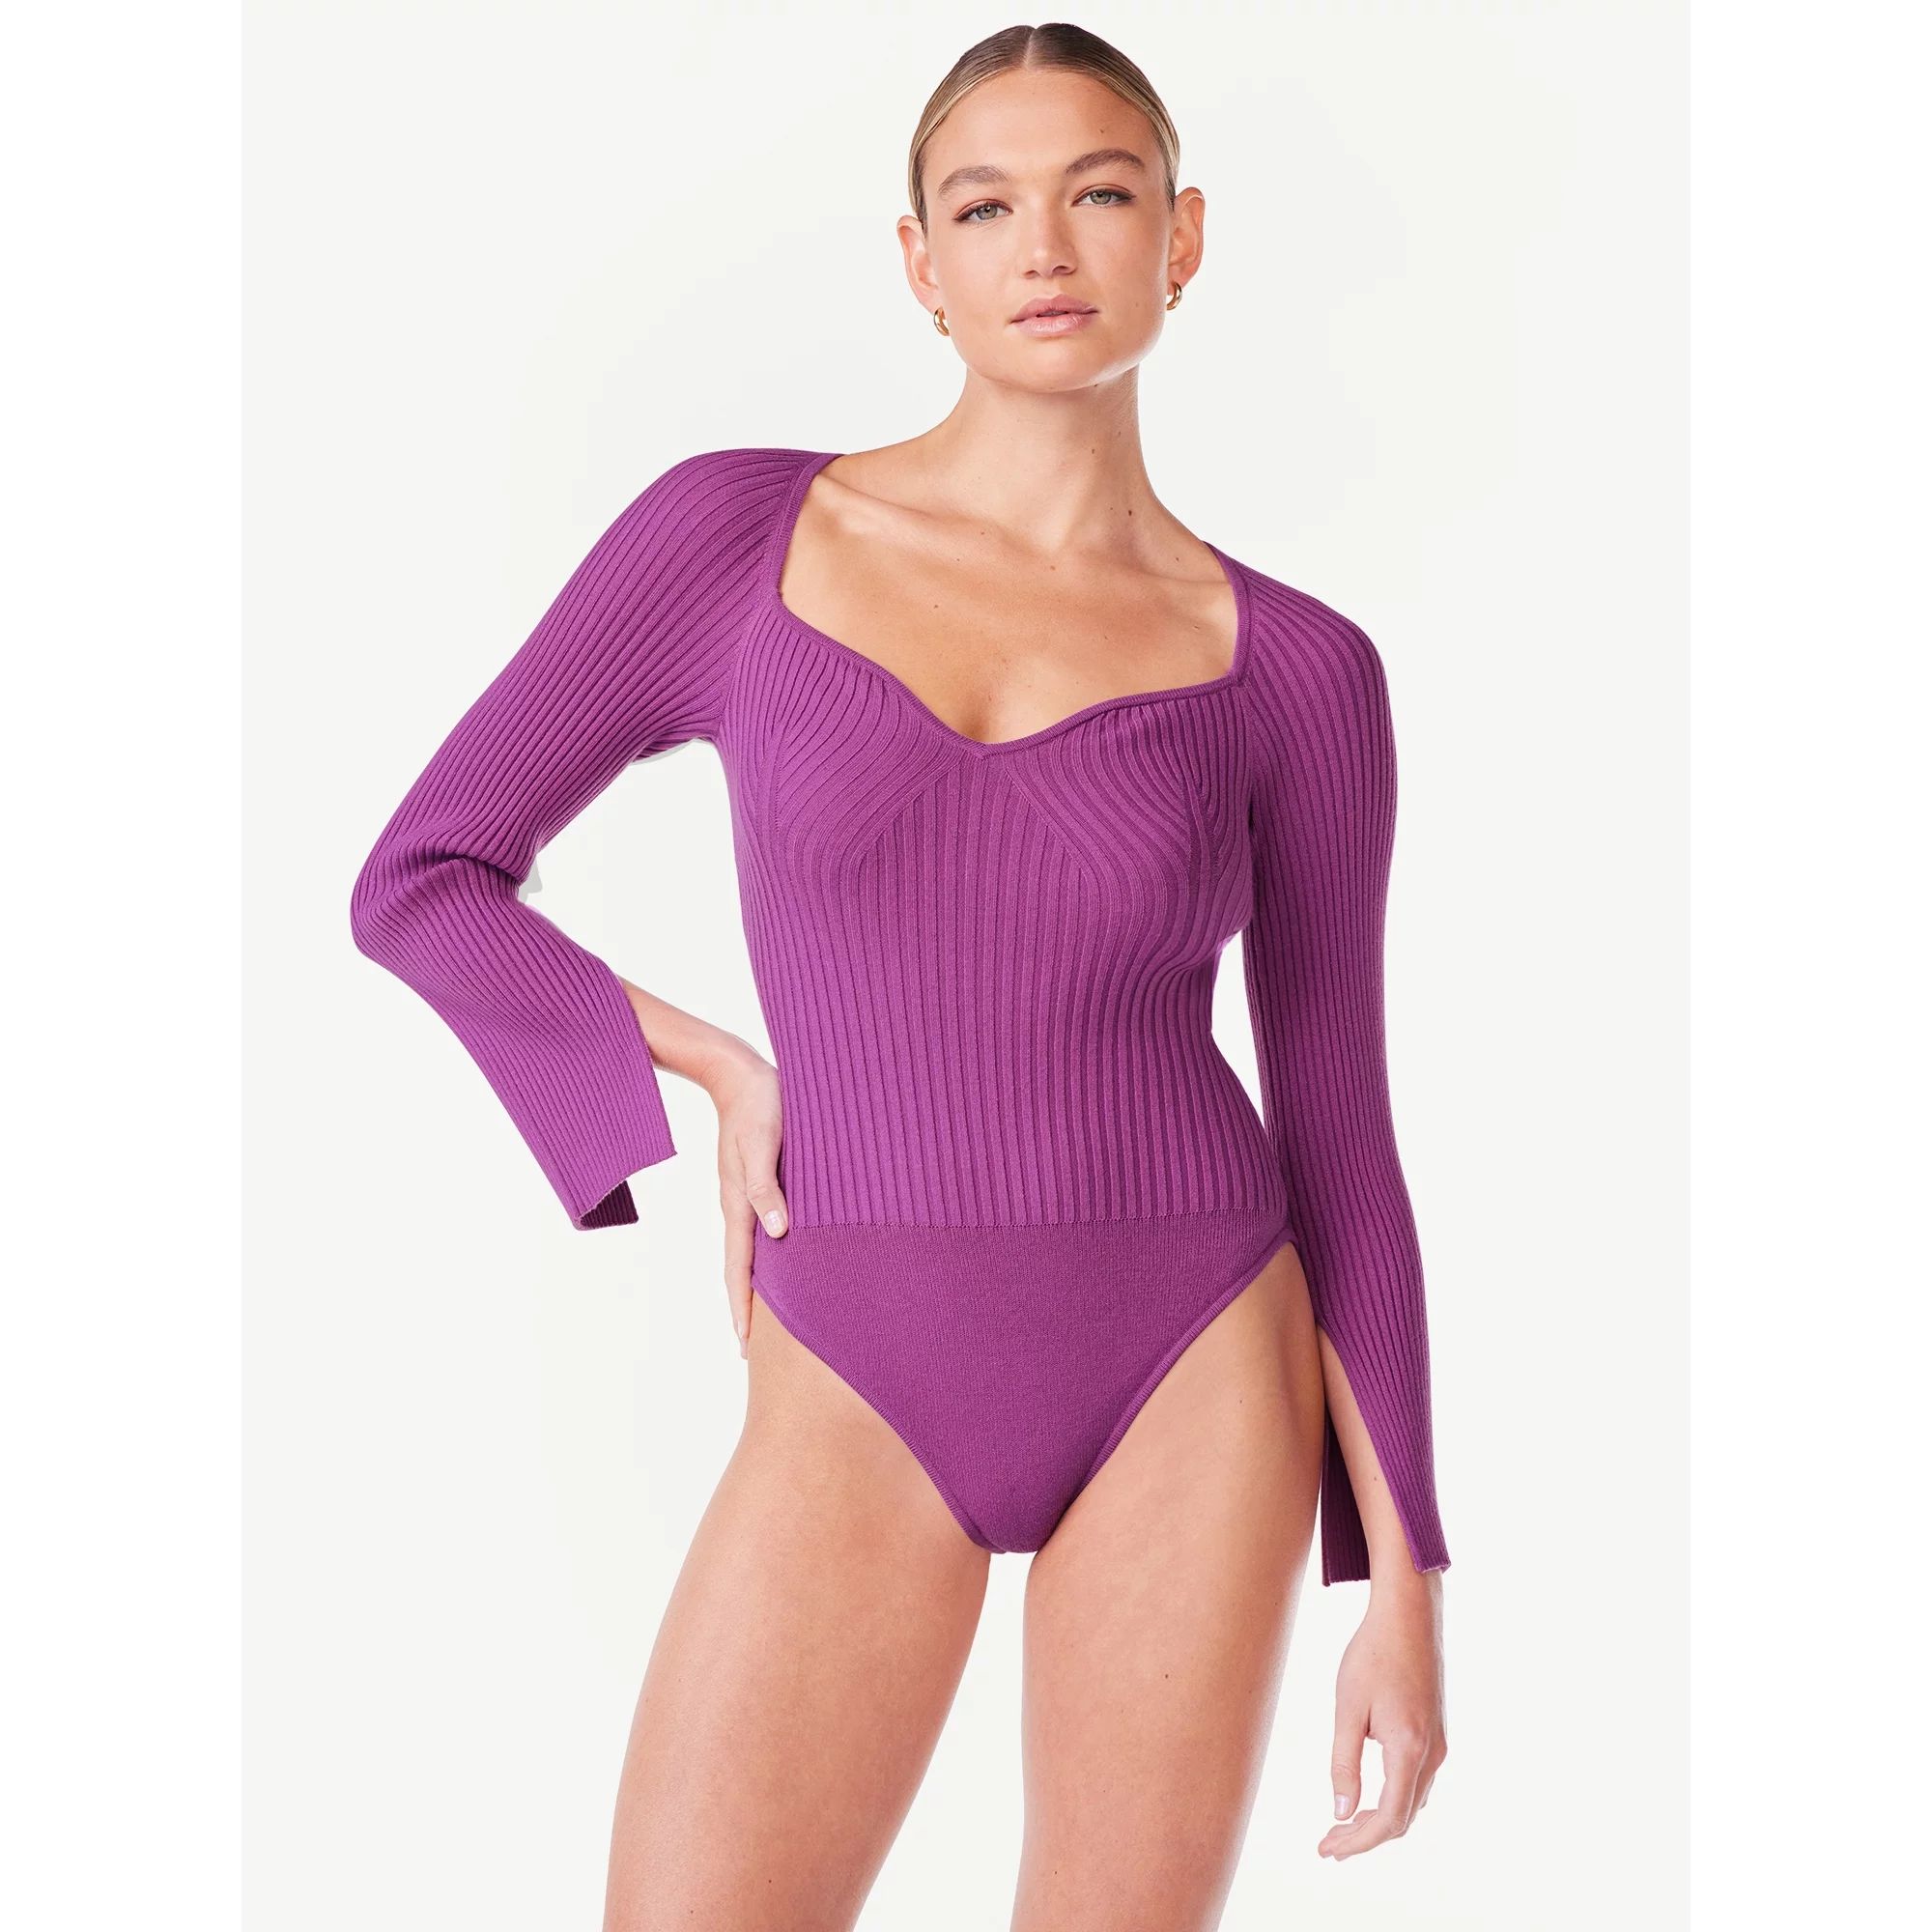 Scoop Women's Ribbed Bodysuit with Sweetheart Neck and Long Sleeves, Sizes XS-XXL | Walmart (US)